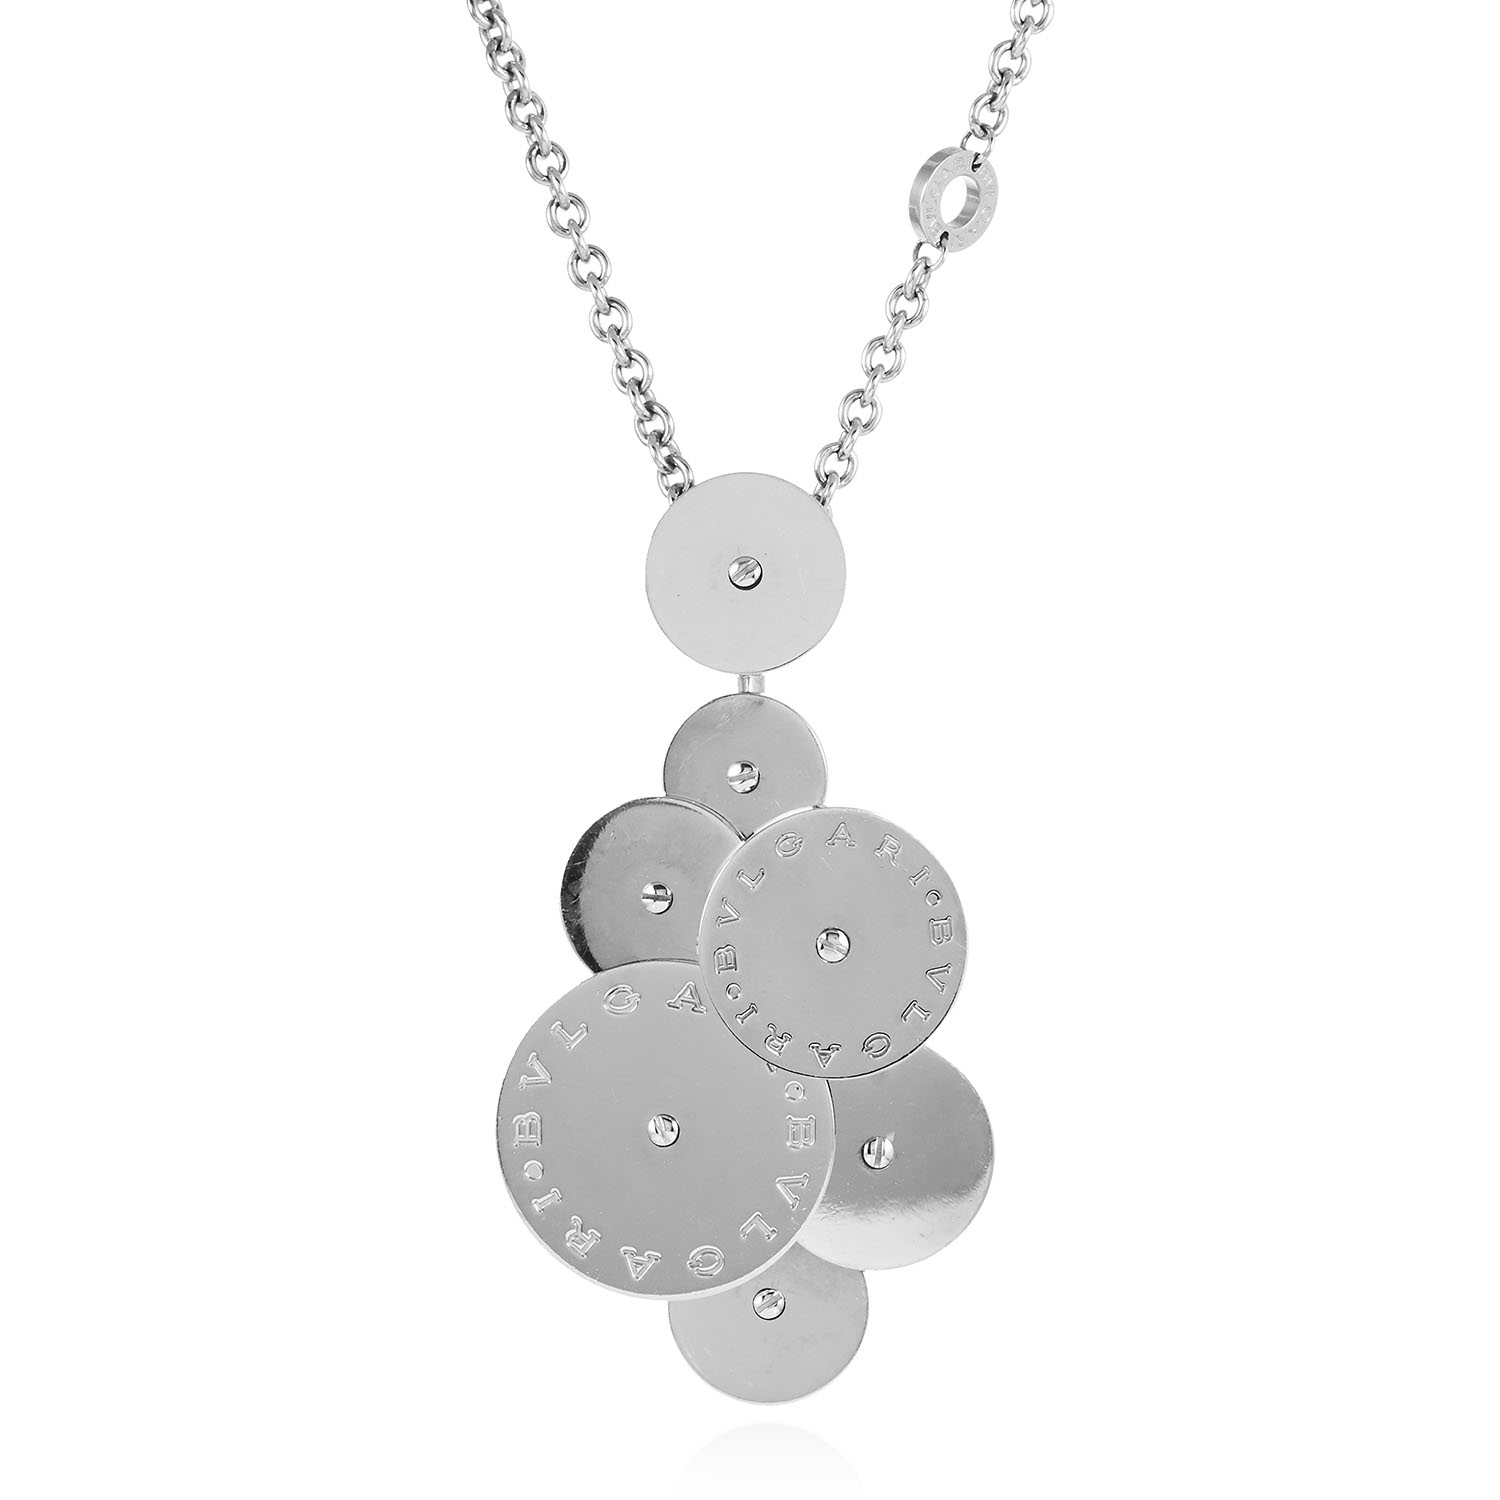 AN ARTICULATED CIRCULAR PENDANT, BVLGARI in 18ct white gold, designed as seven varying size